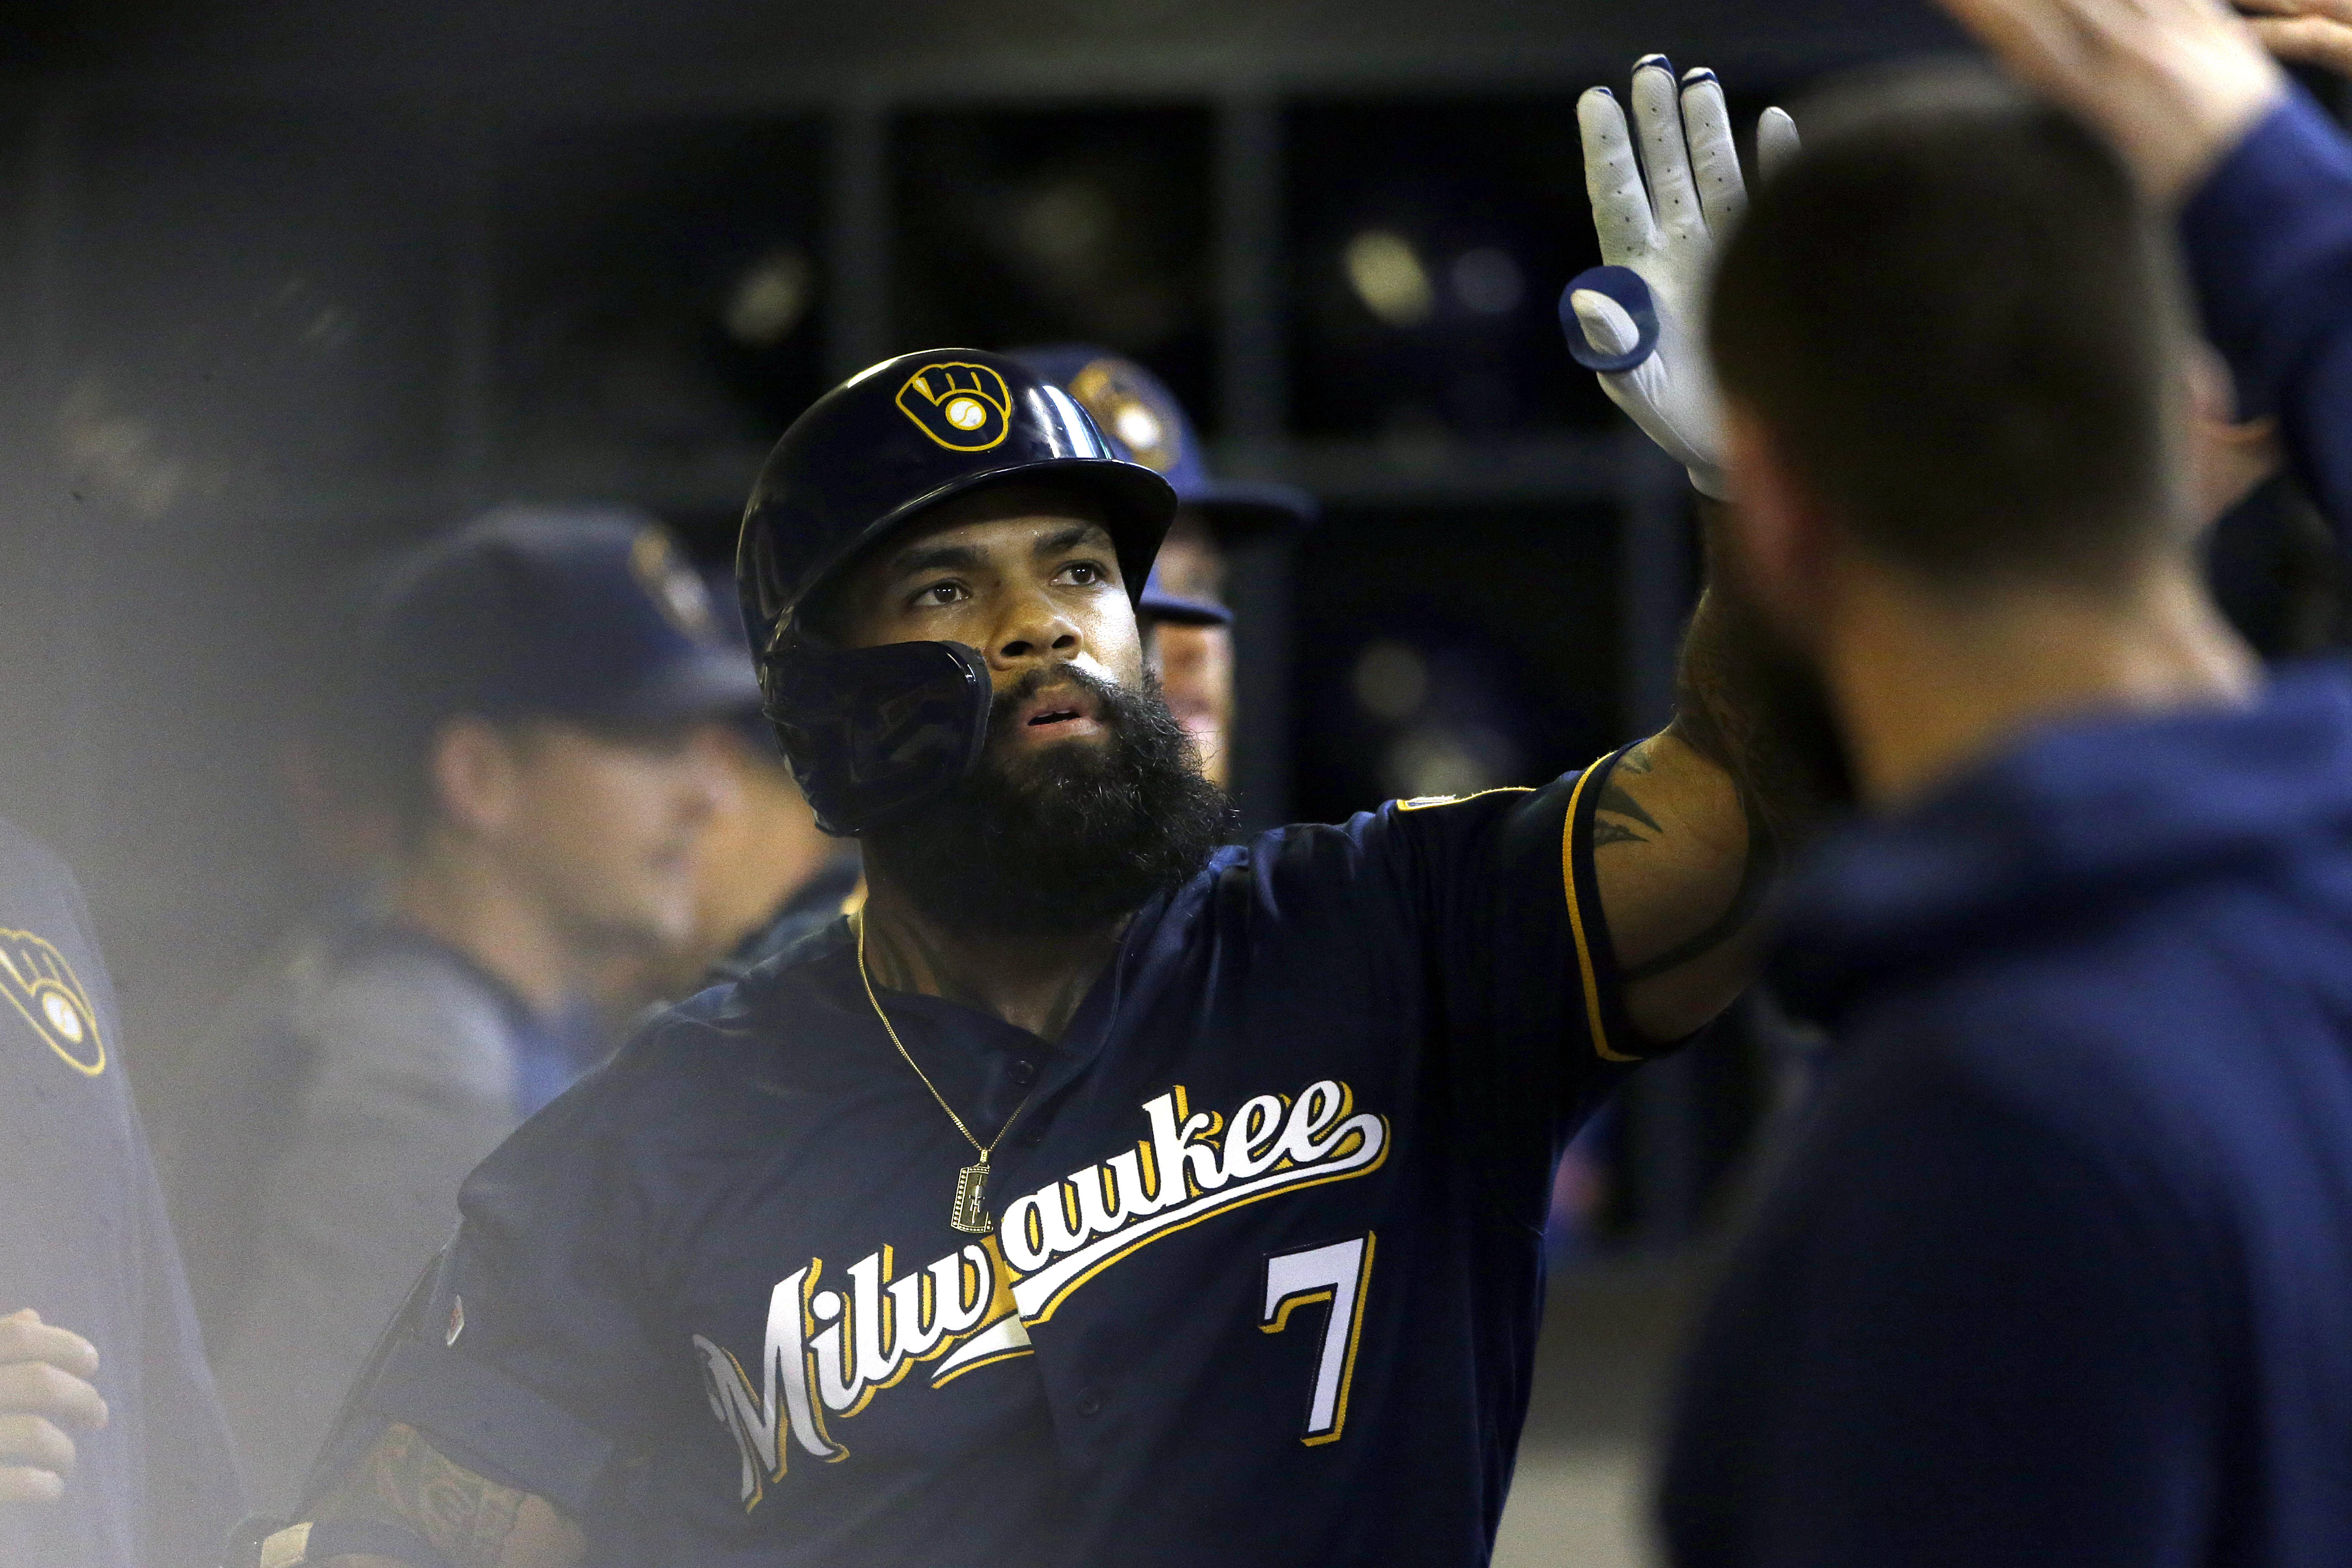 Thames homers twice, Brewers move into tie for top wild card